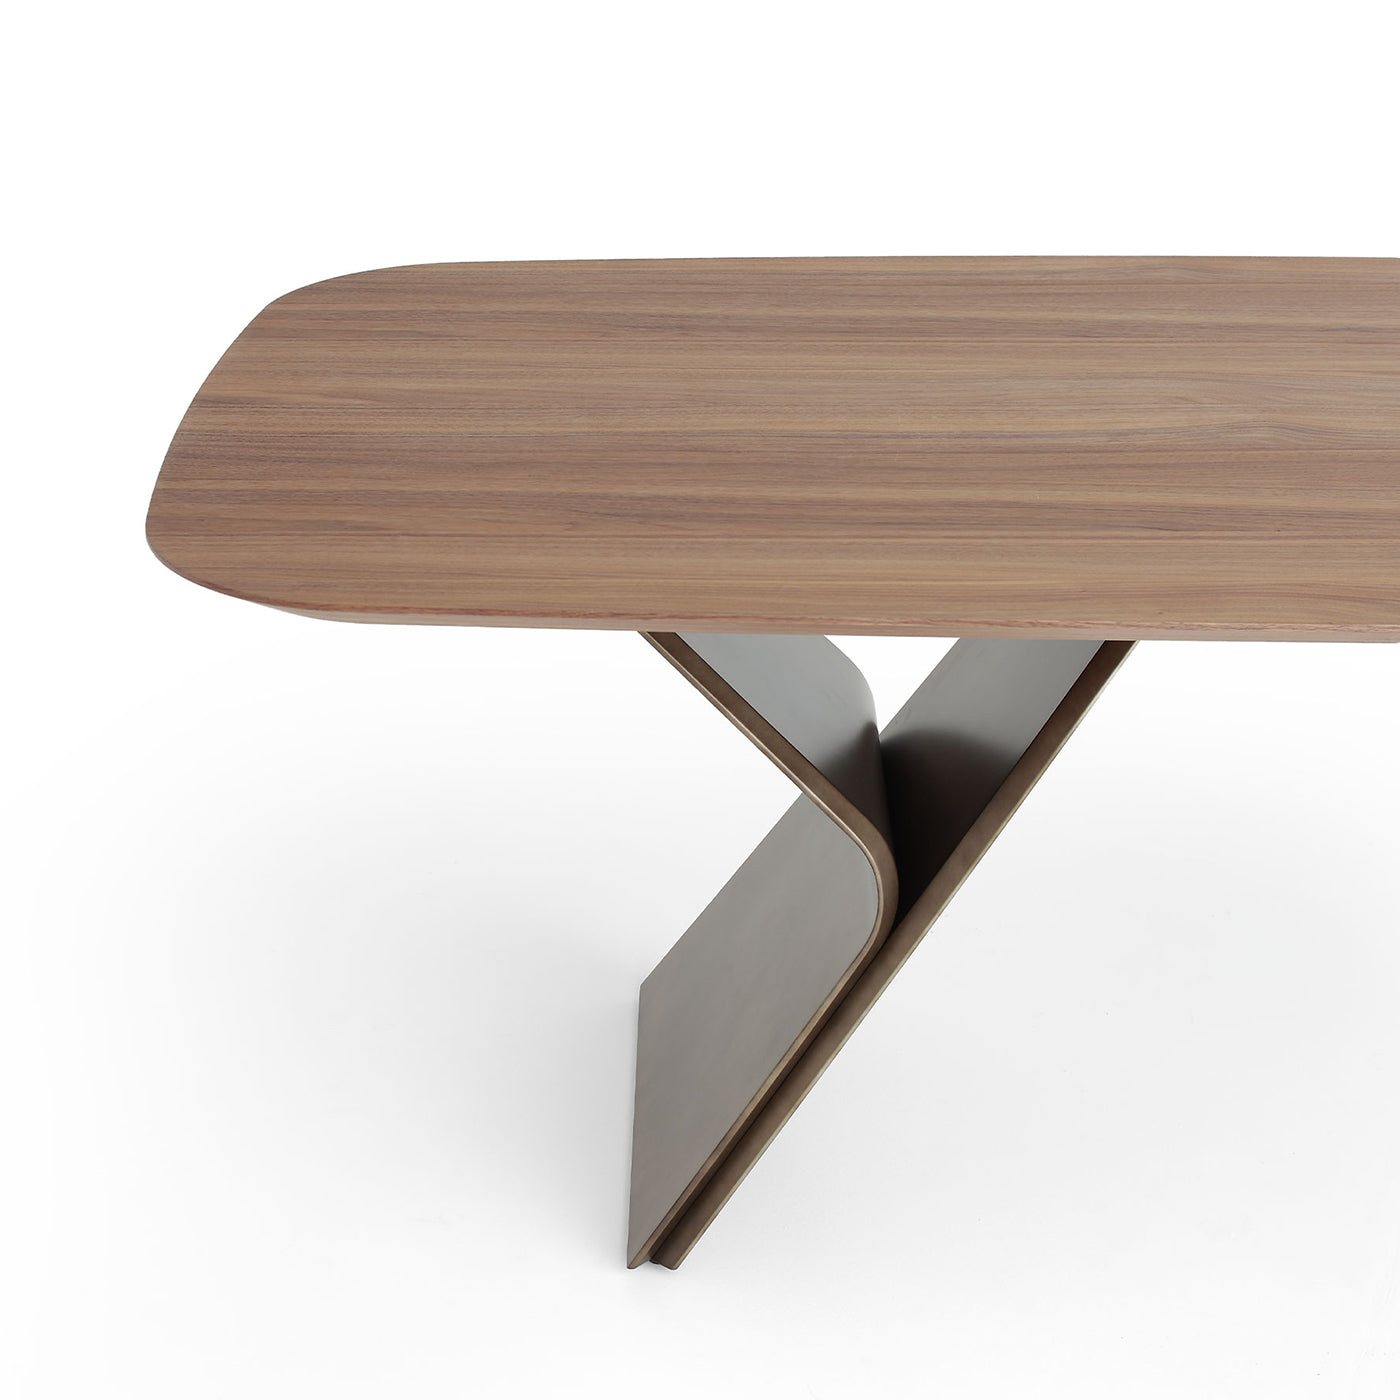 Metaverso Canaletto Walnut Wood Table - Alternative view 3